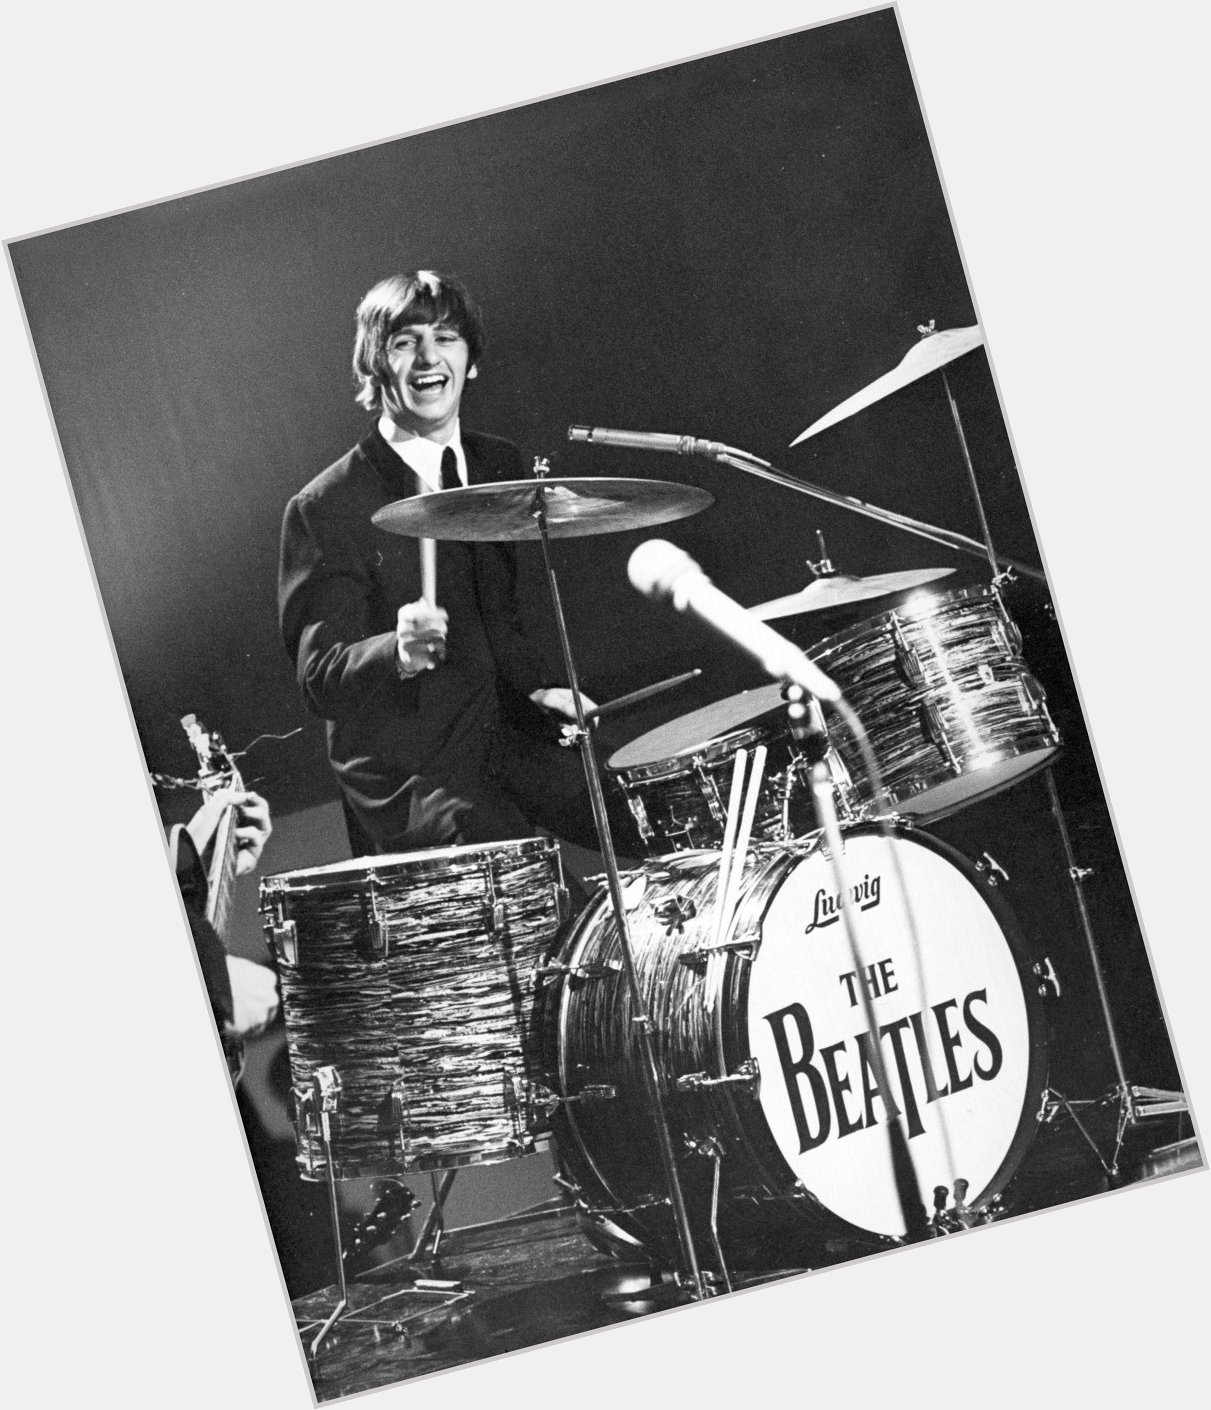 Happy Birthday Ringo Starr, drummer with The Beatles, born on this day in 1940. 